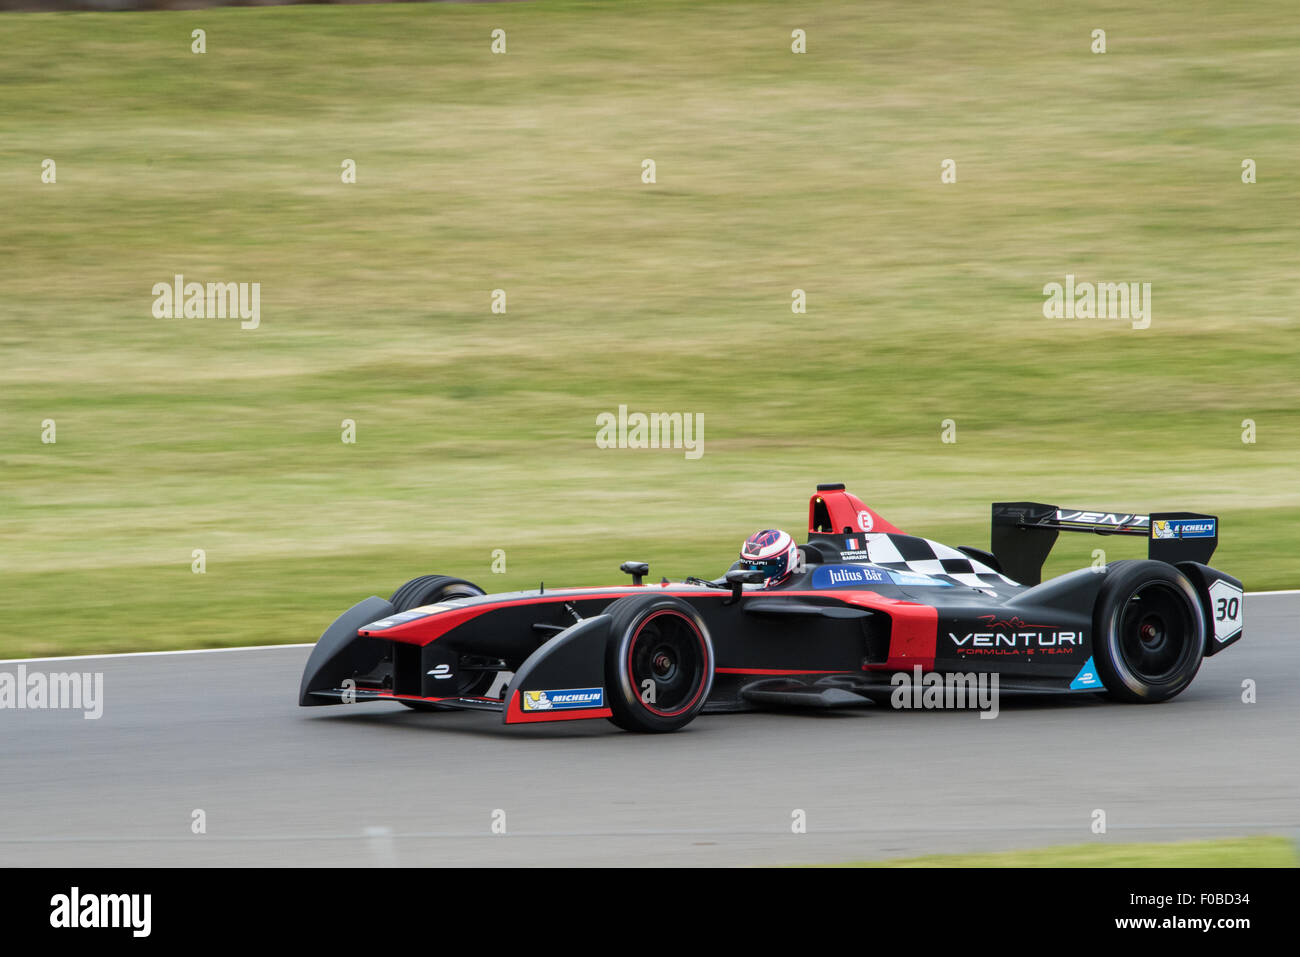 Racing Fahrer Stéphane Sarrazin in einer Formel E Electric Racing Autotests in Donington Raceway Leicestershire UK August 2015 Stockfoto